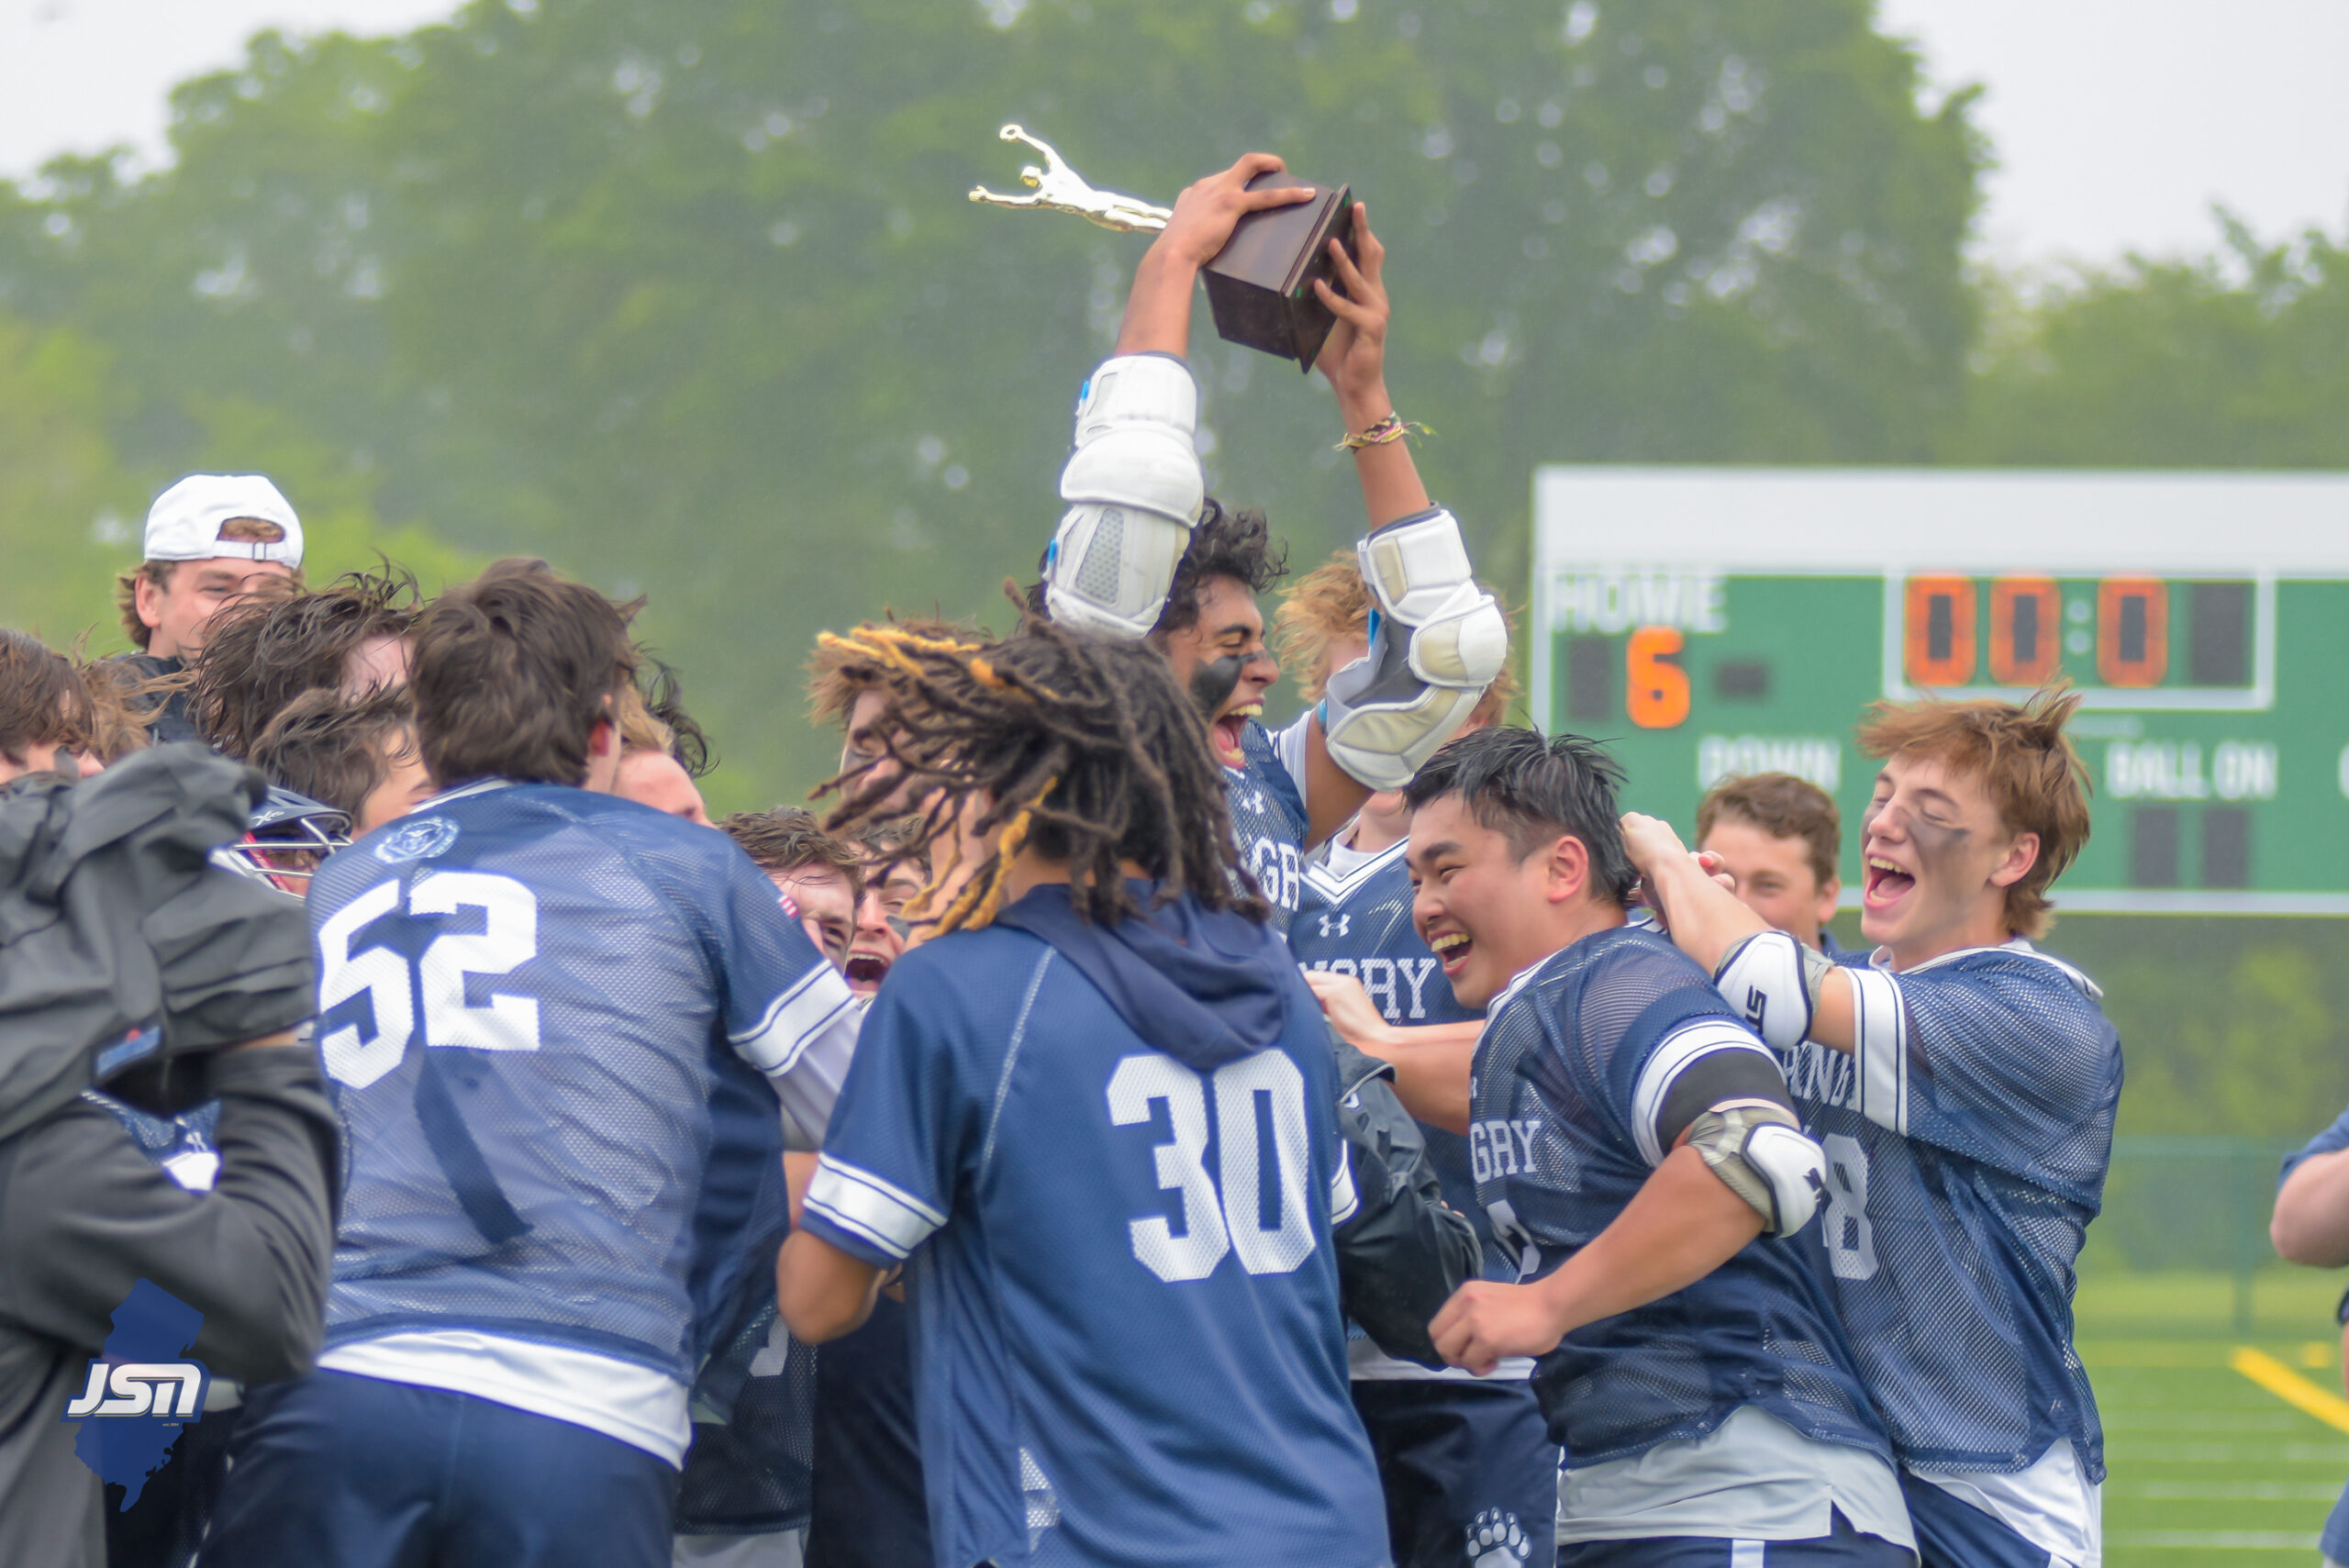 Pingry wins the 2023 Somerset County Boys Lacrosse Championship